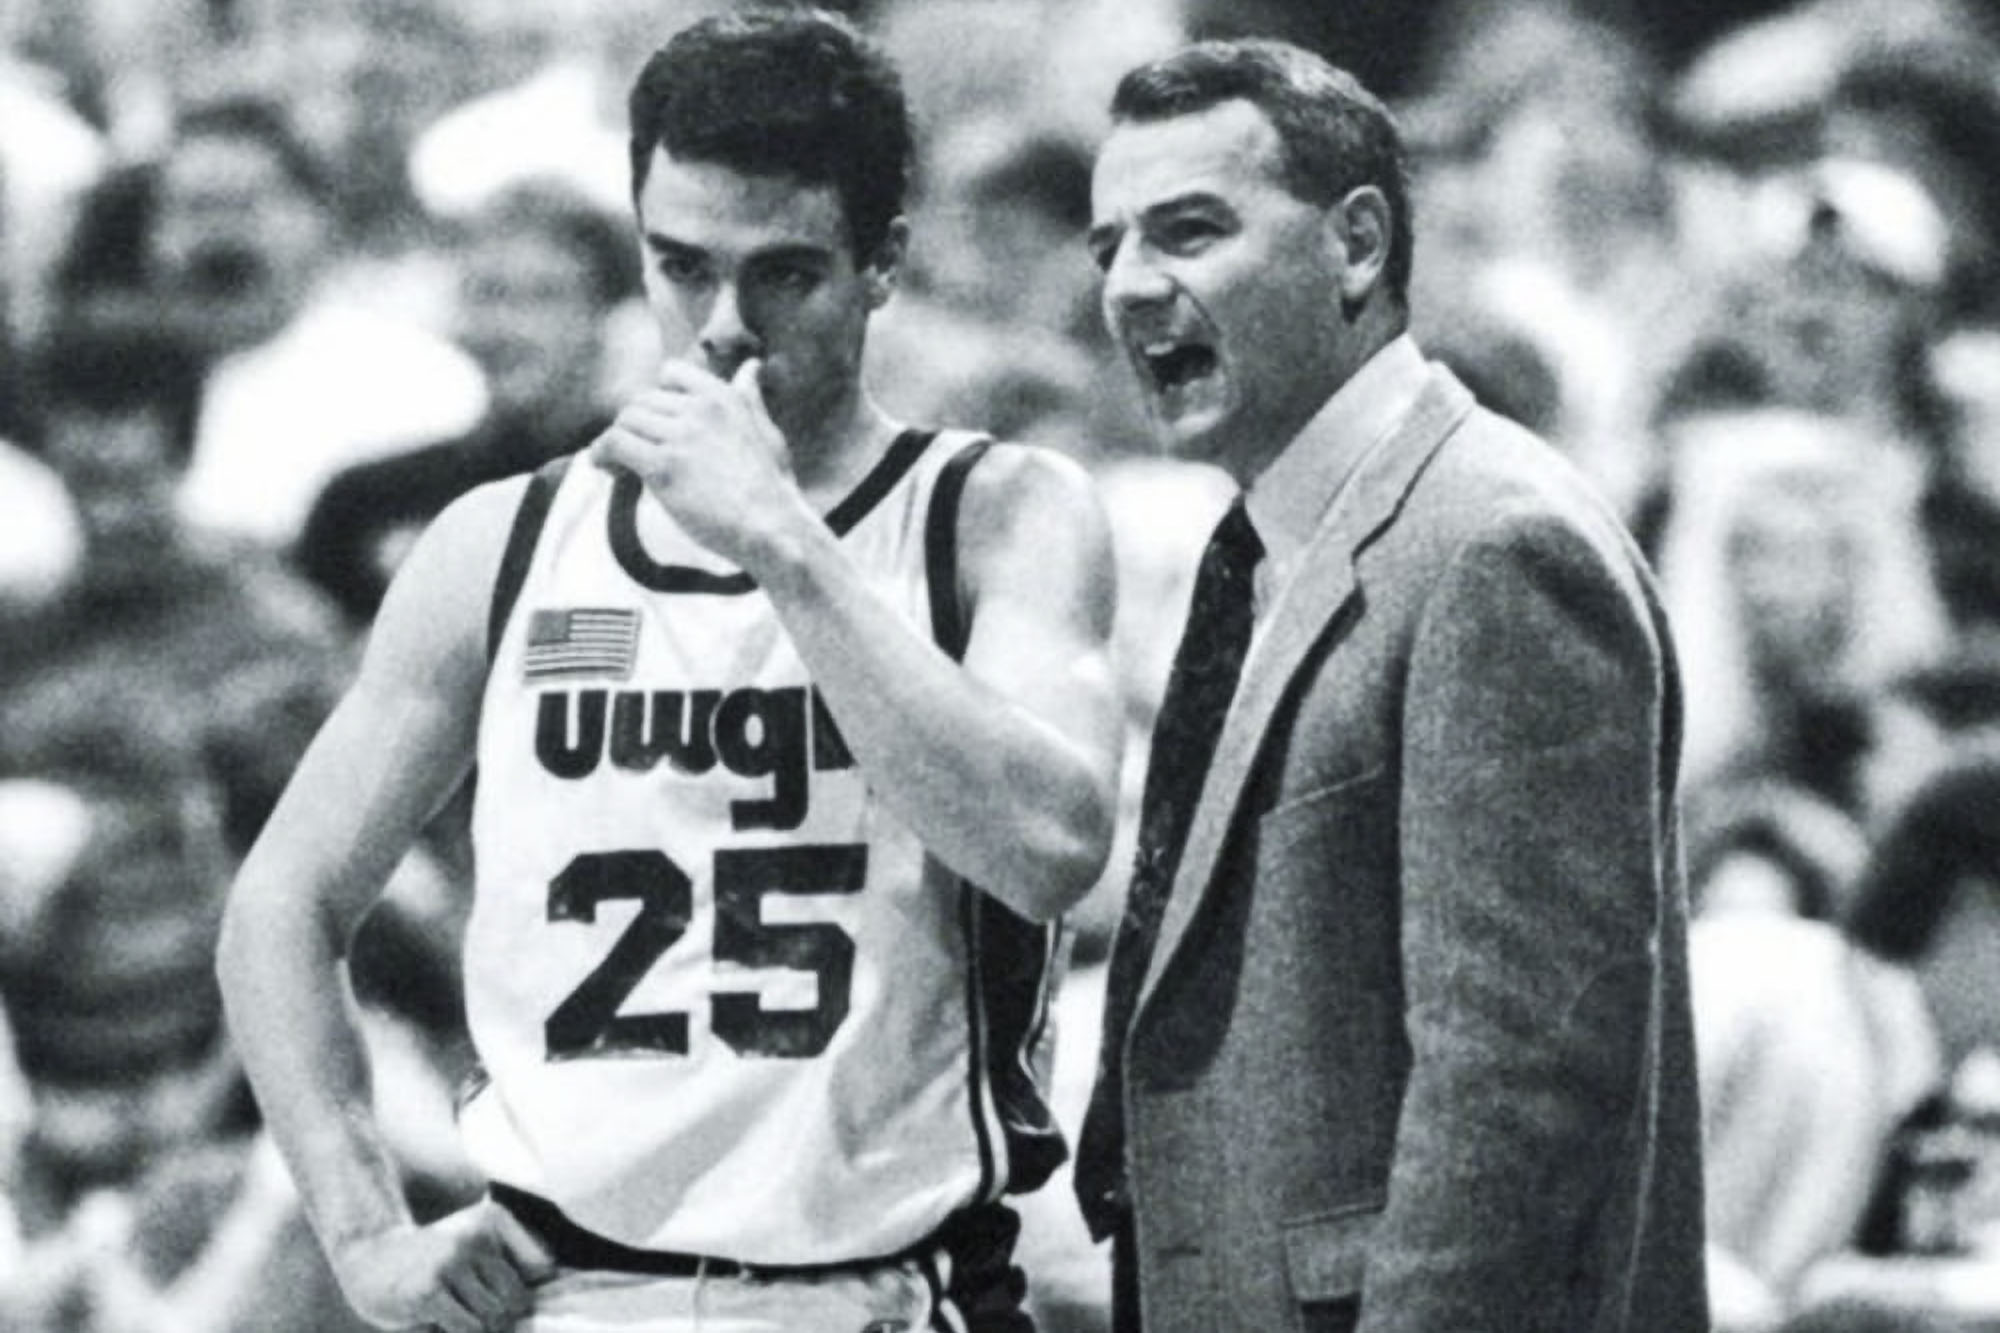 Tony Bennett, left, standing next to his basketball coach during a game